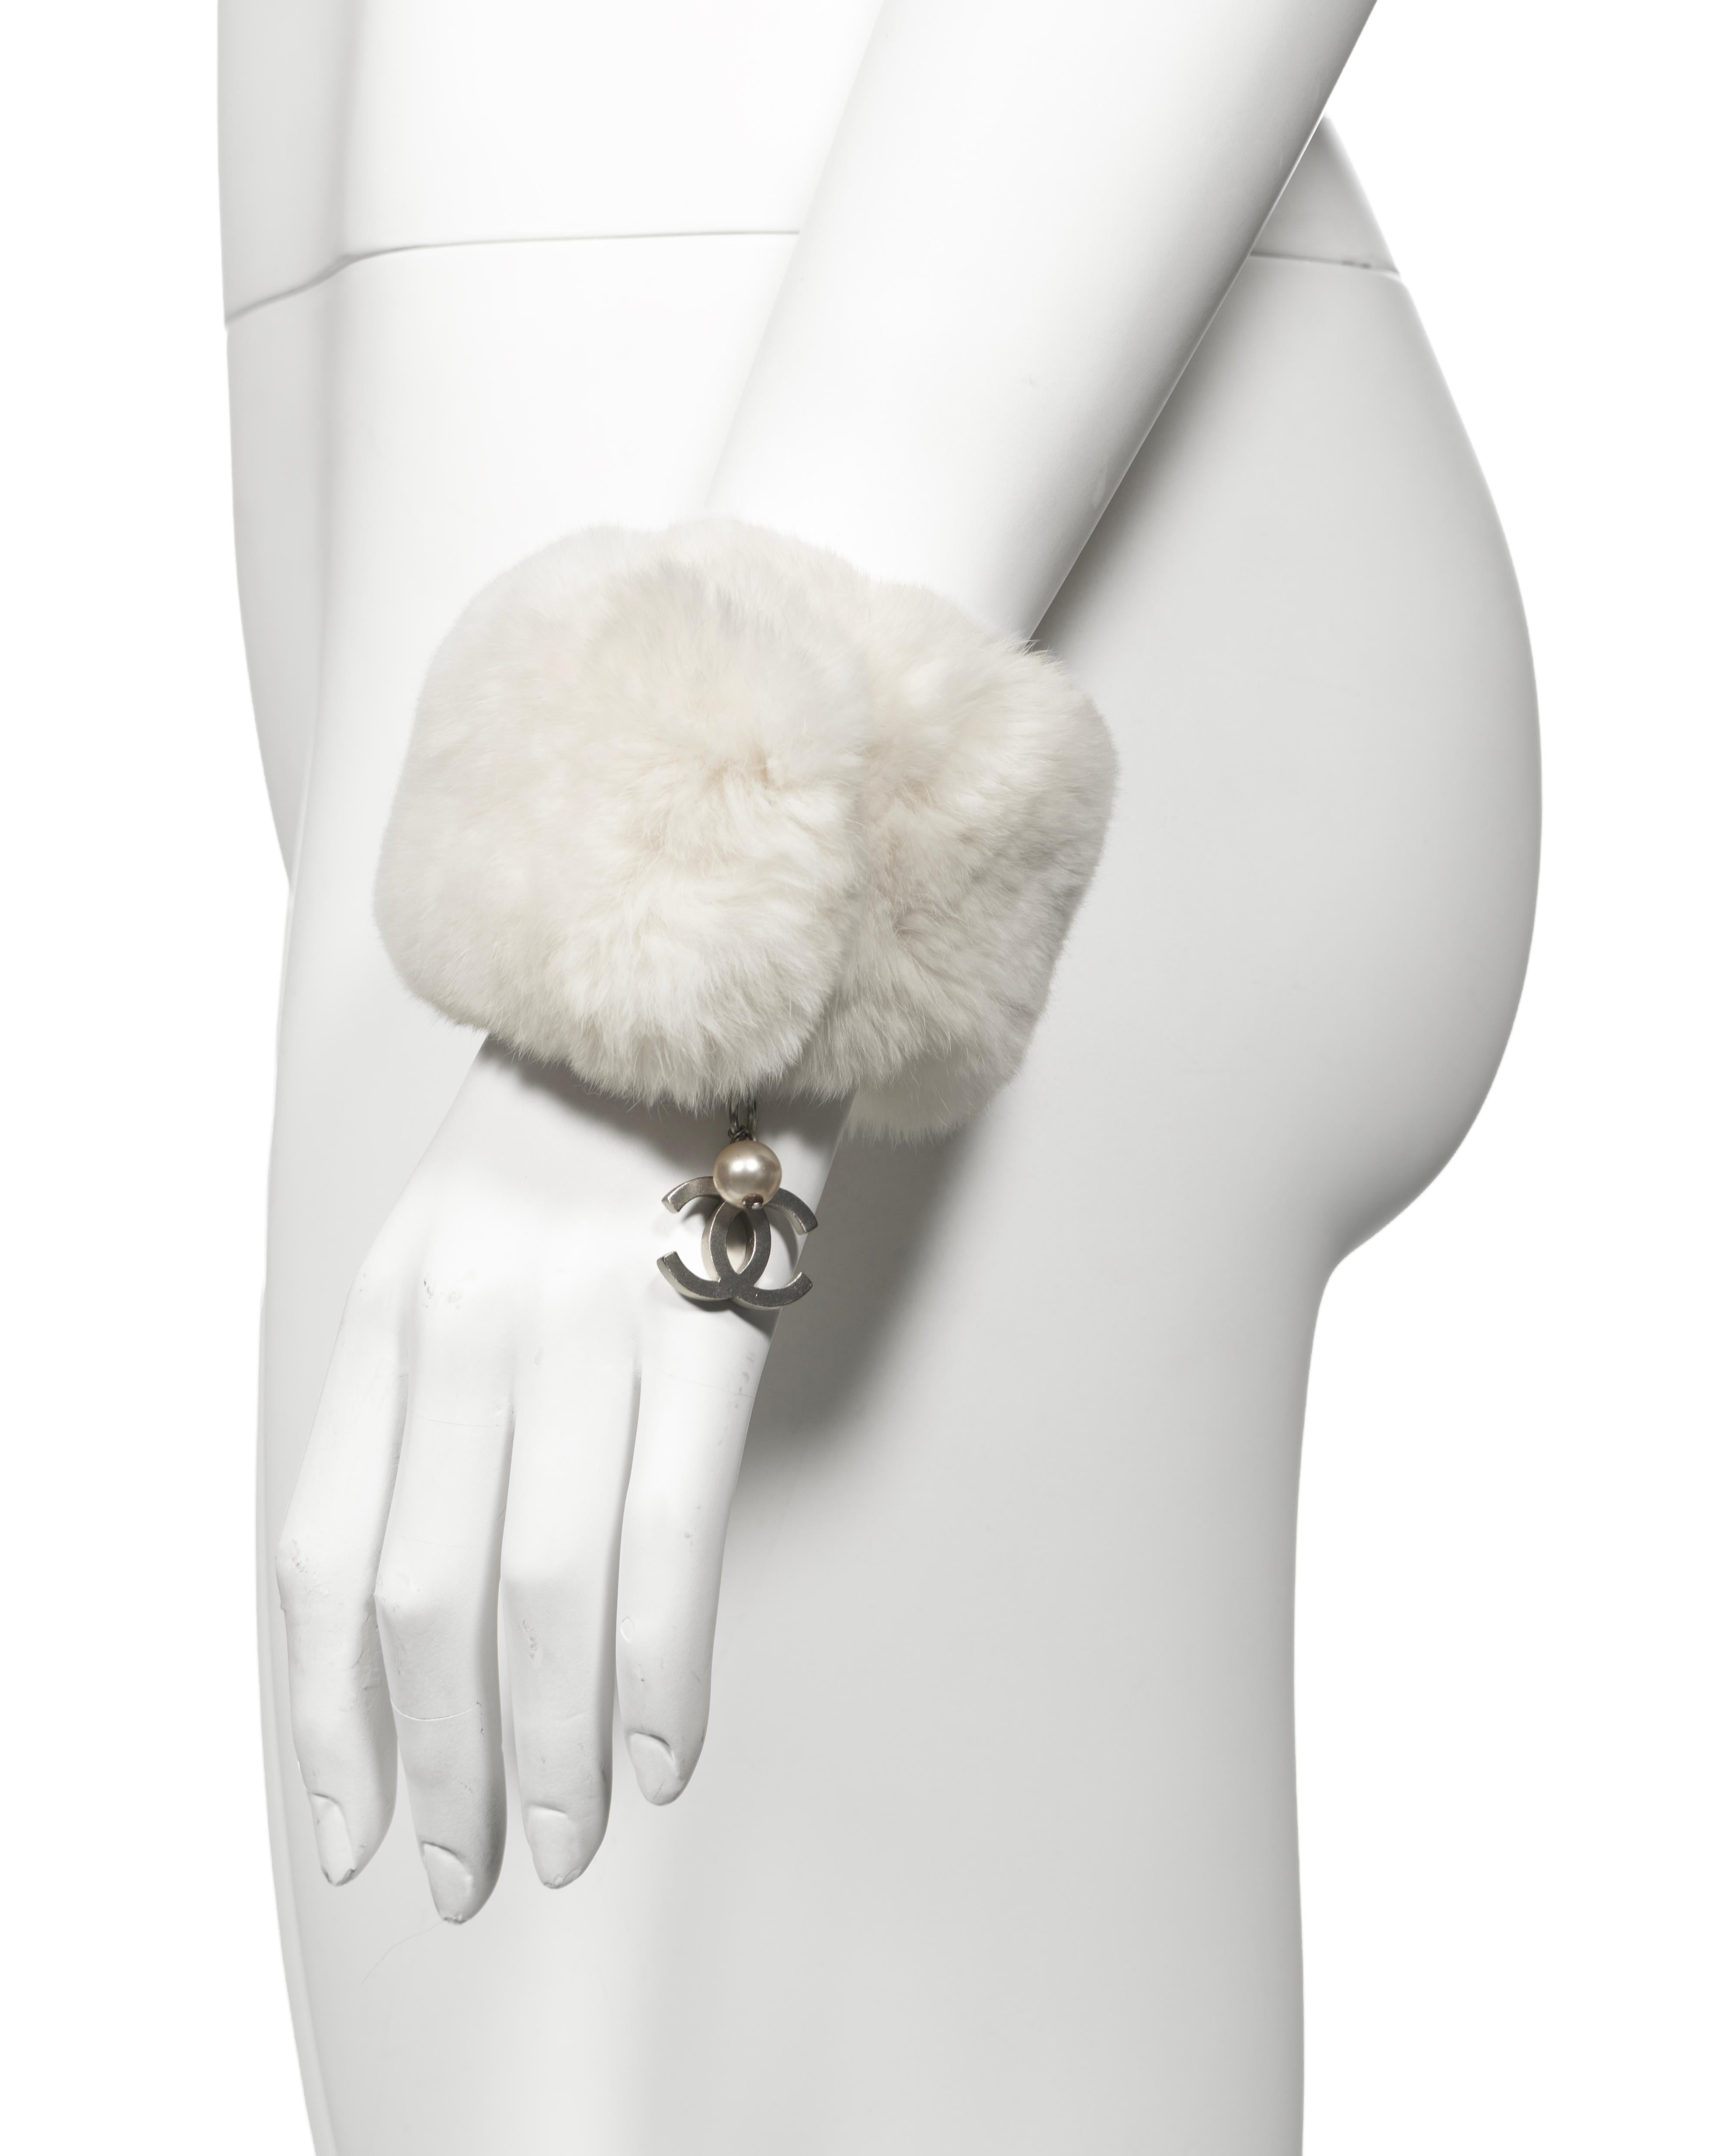 Chanel by Karl Lagerfeld White Rabbit Fur Collar and Cuffs, fw 2003 For Sale 5